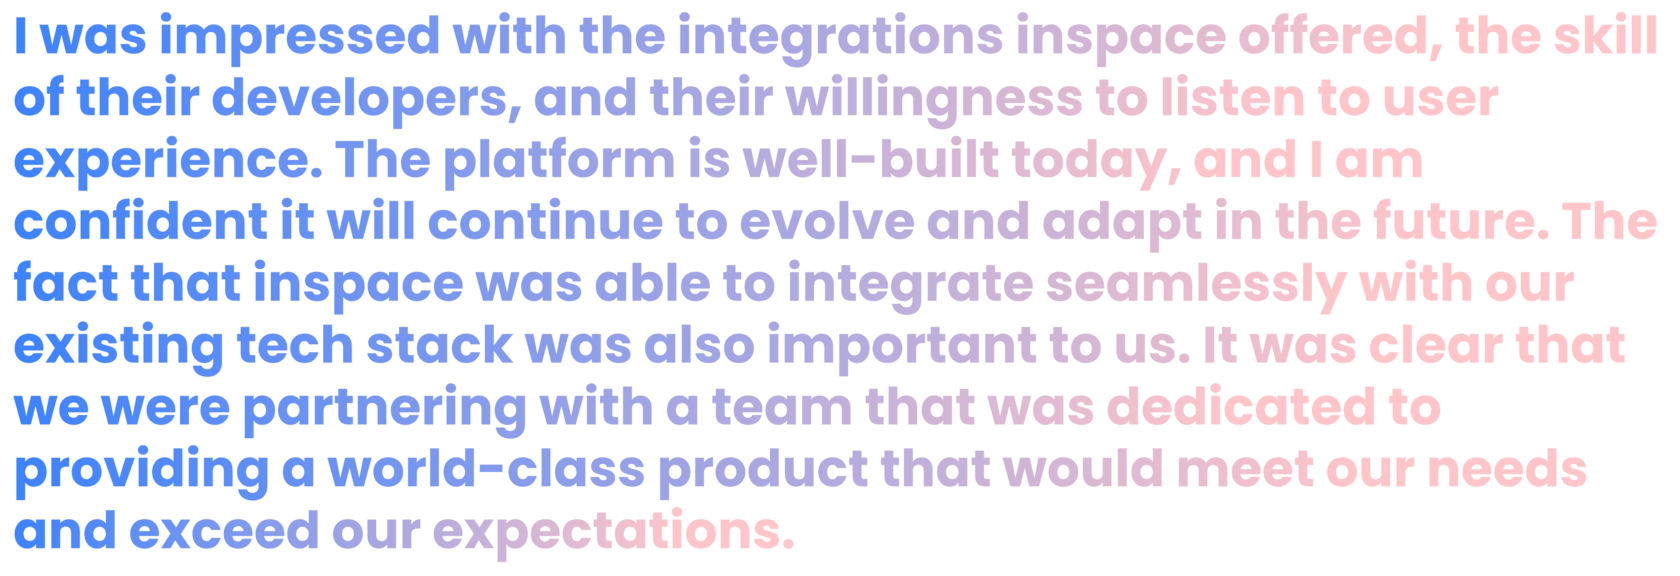  I was impressed with the integrations inspace offered, the skill of their developers, and their willingness to listen to user experience. The fact that inspace was able to integrate seamlessly with our existing tech stack was also important to us. Clearly, we were partnering with a team dedicated to providing a world-class product that would meet our needs and exceed expectations. Kristen Harrison IT Applications NCSSM